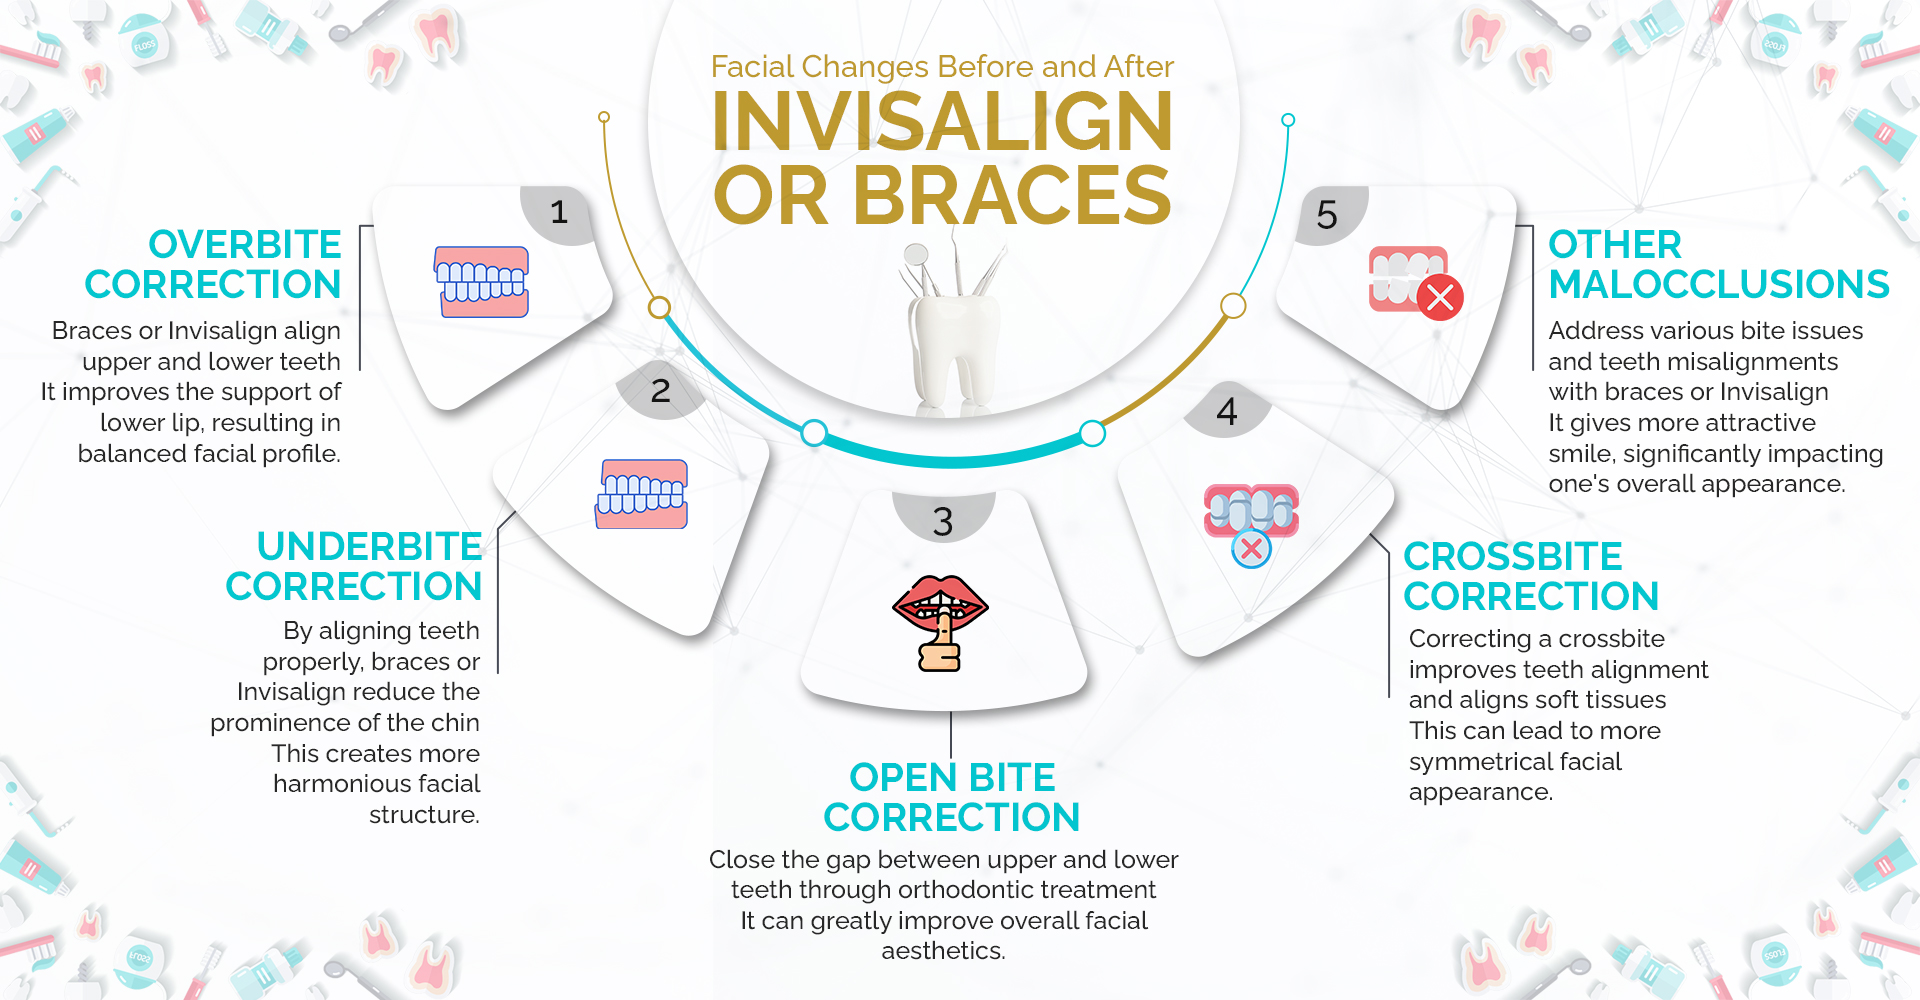 Facial Changes Before and After Invisalign or Braces